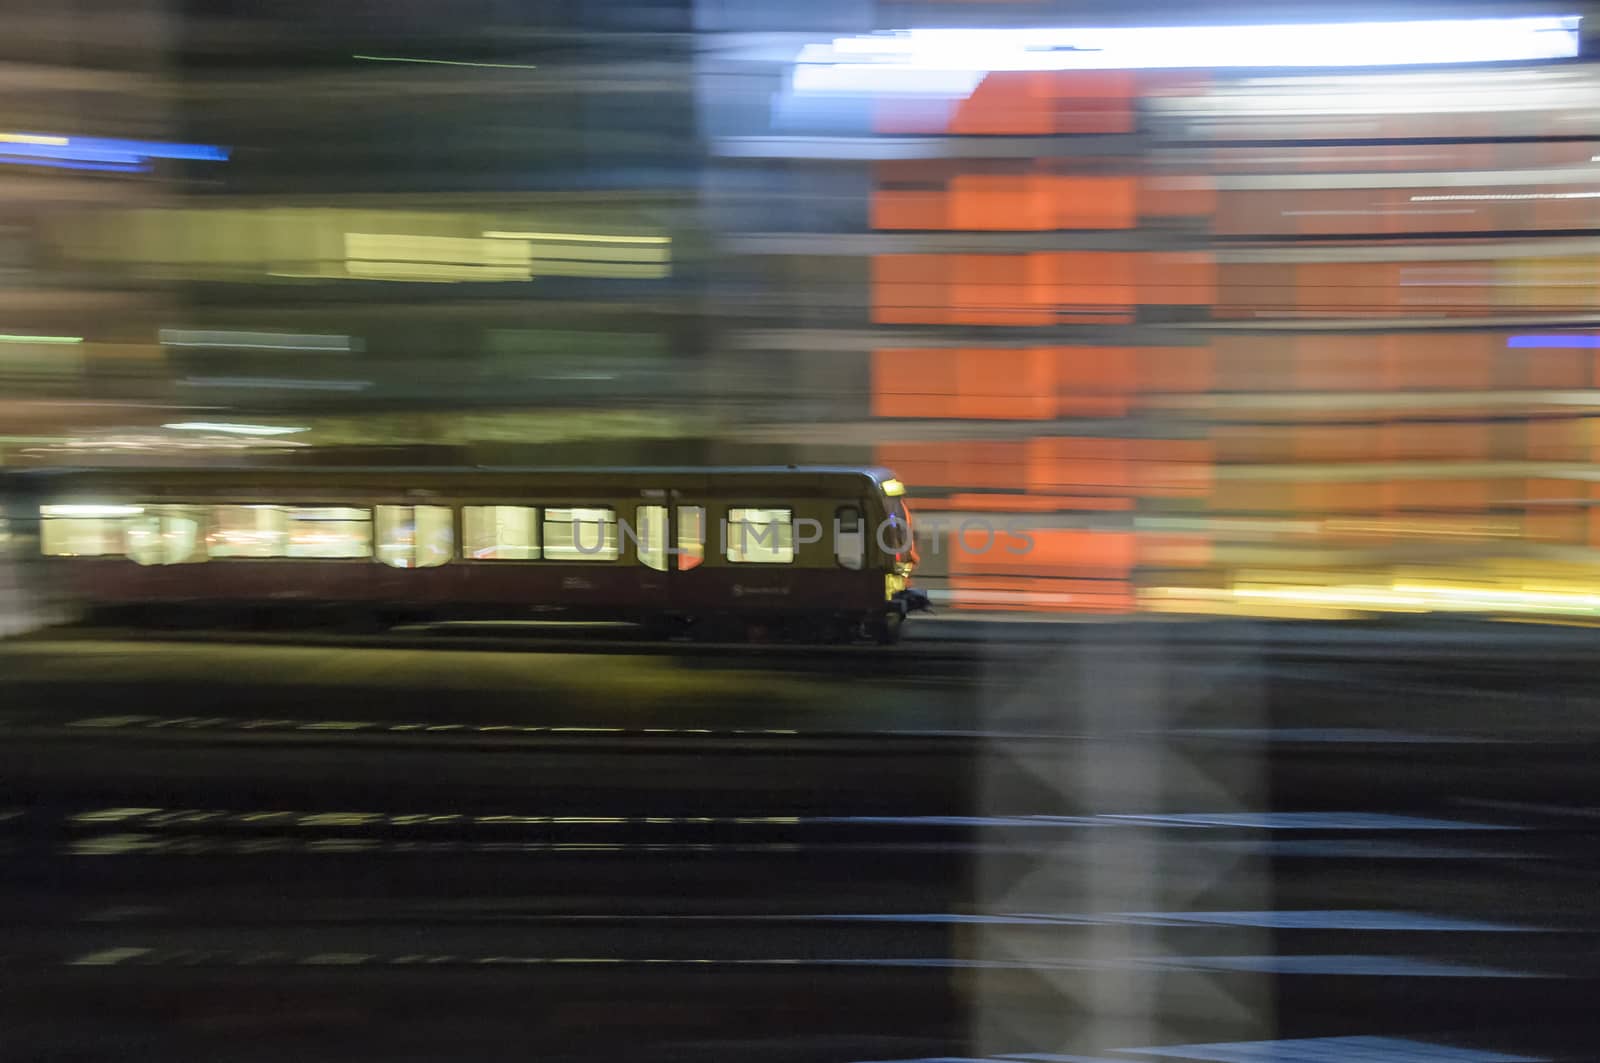 Train accelerating from the station at night, blur to show the speed and movement